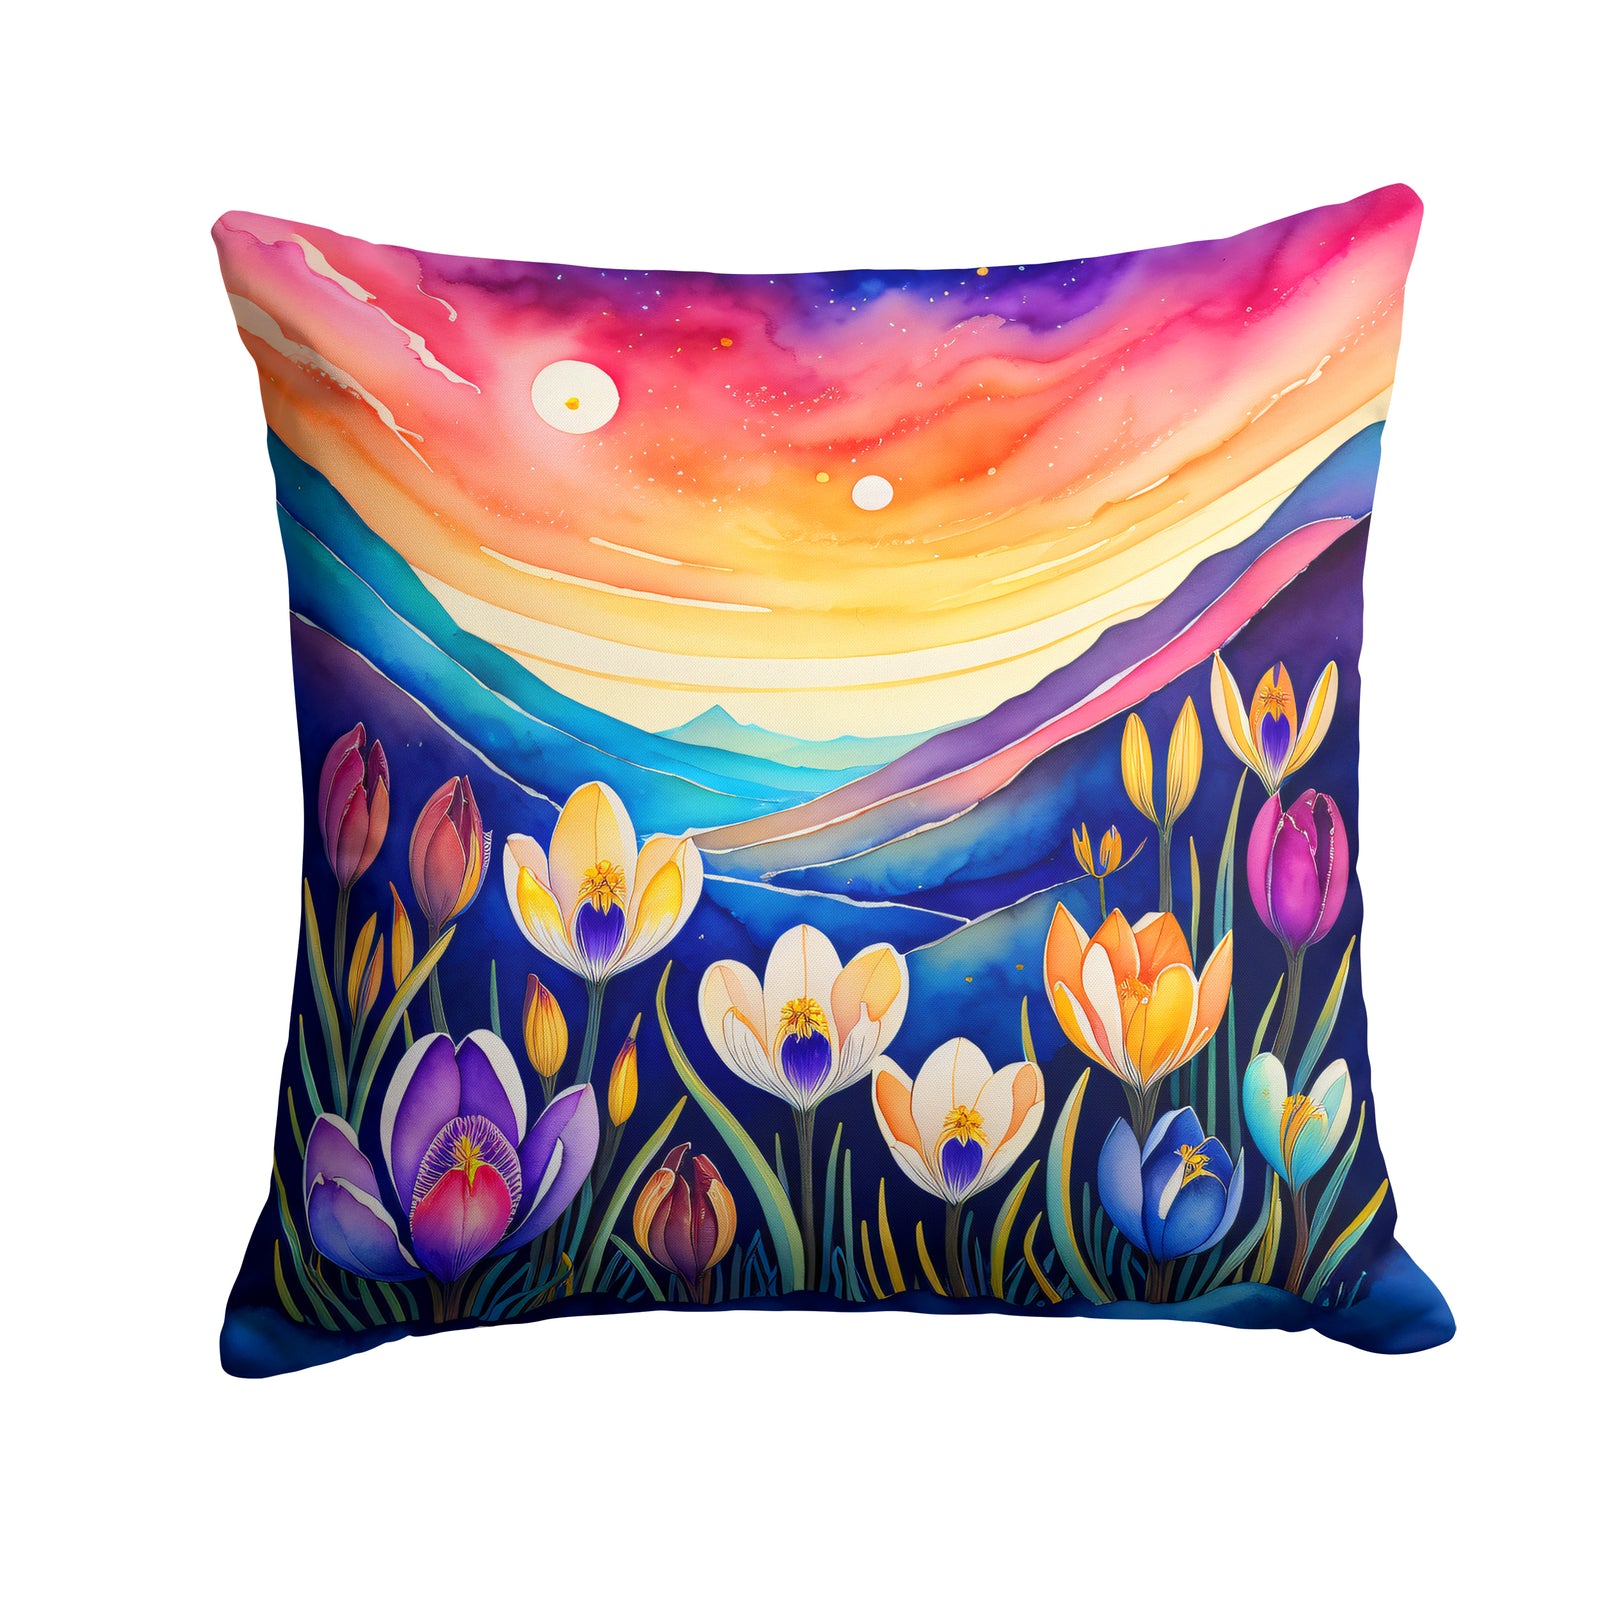 Buy this Colorful Crocus Fabric Decorative Pillow